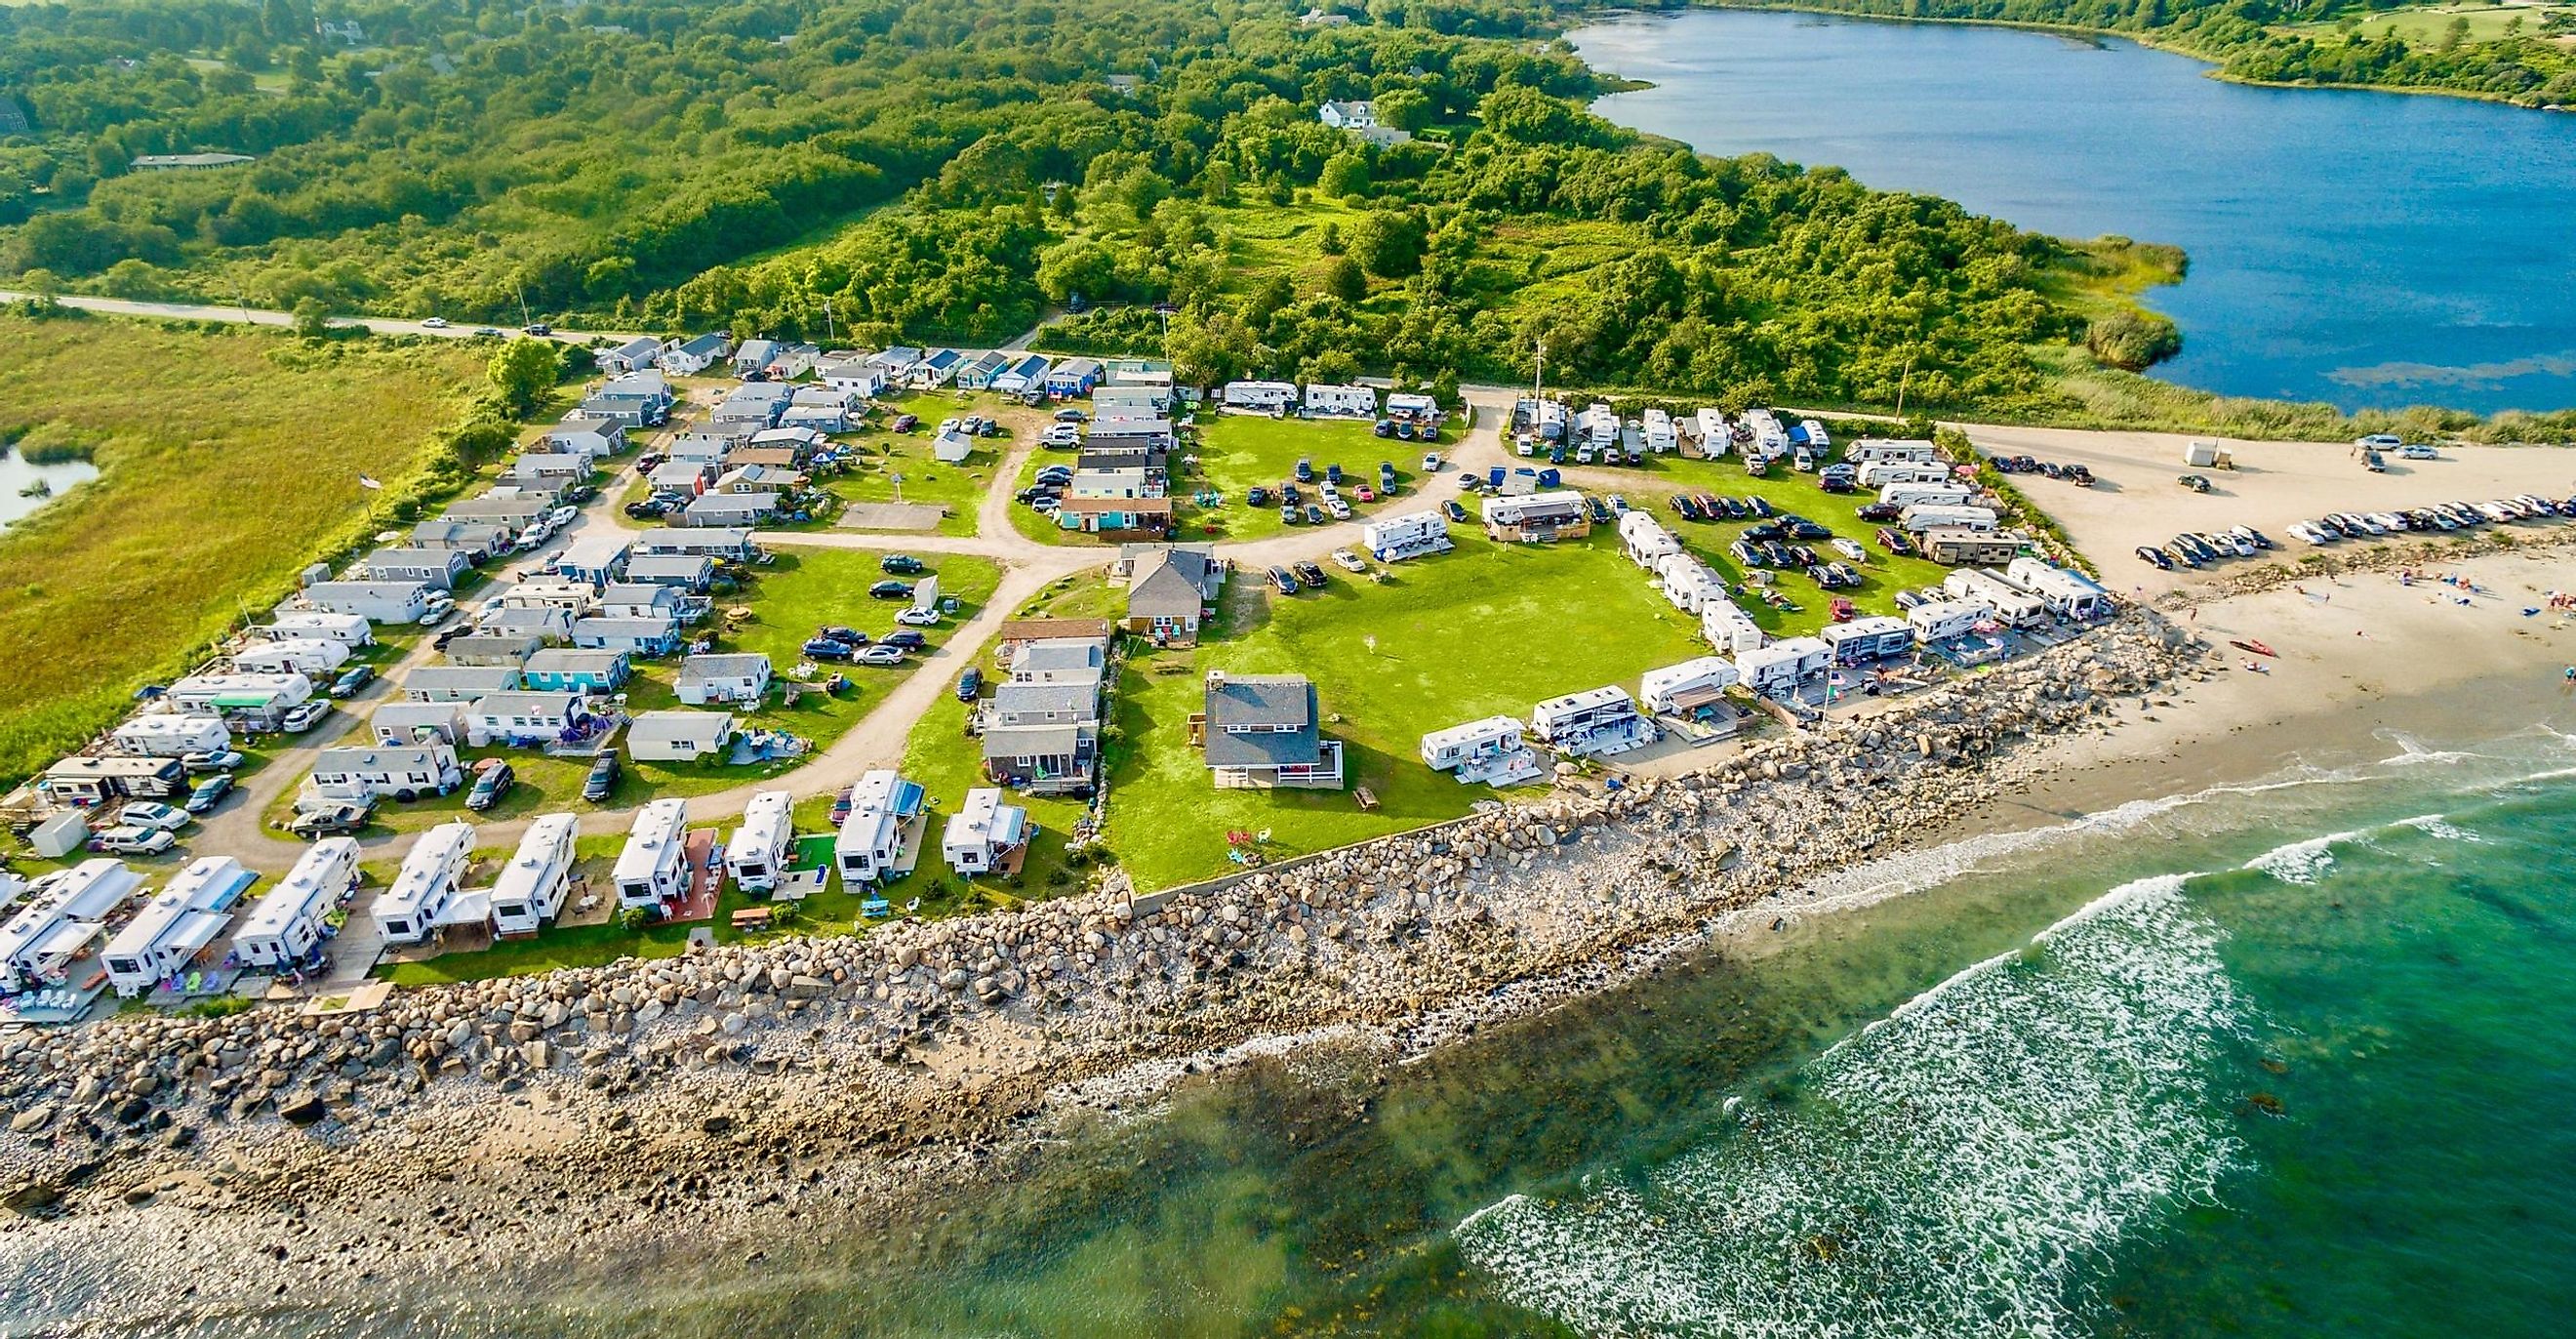 Aerial view of the beachfront campground in Little Compton, Rhode Island.